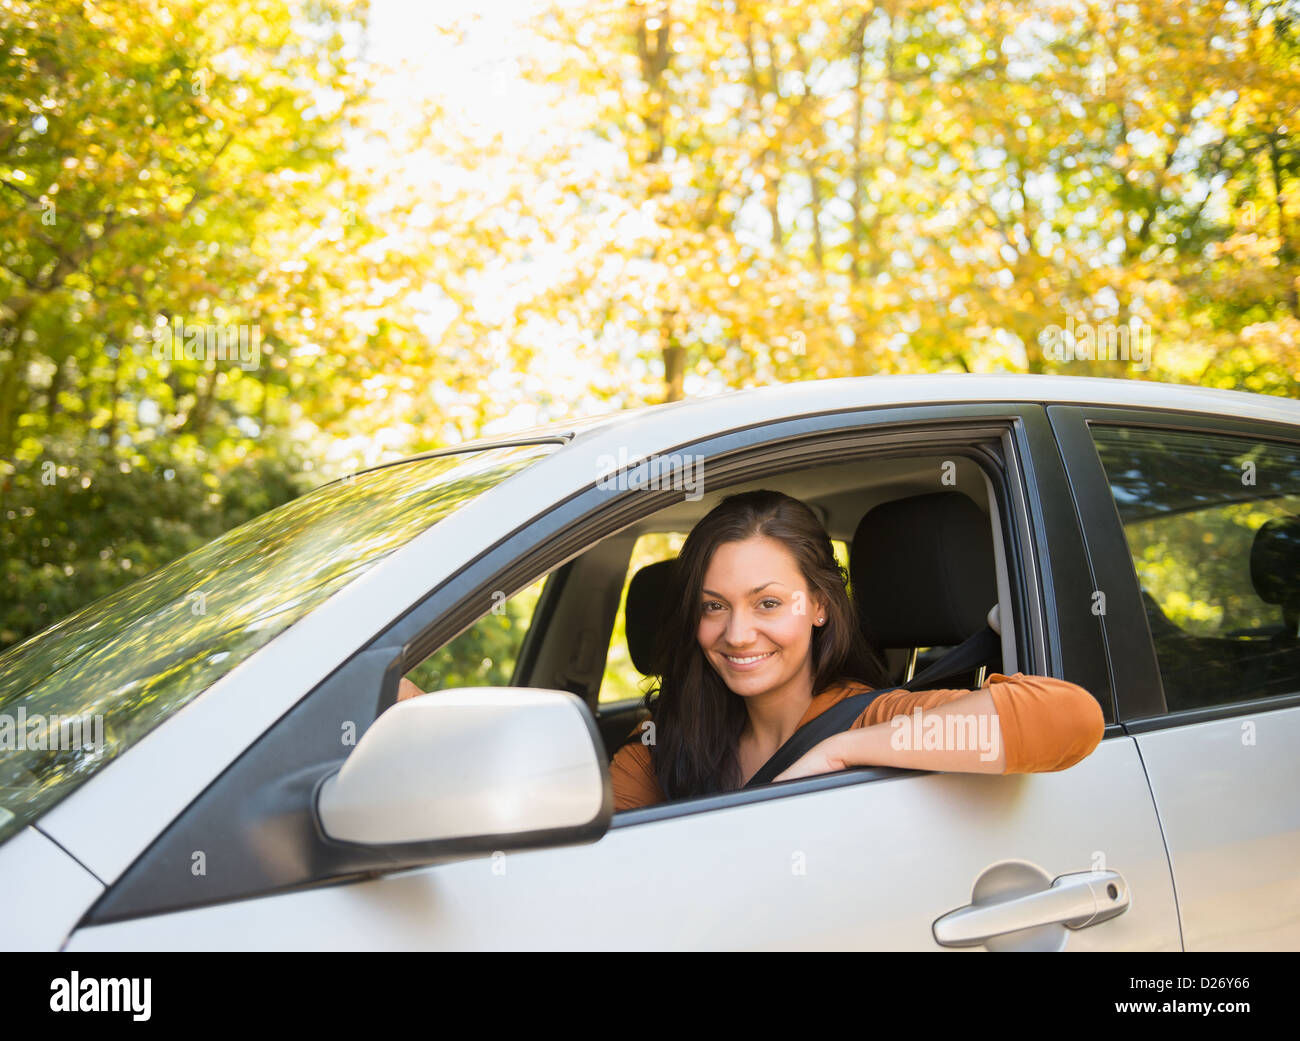 USA, Connecticut, Newtown, Woman driving car Stock Photo